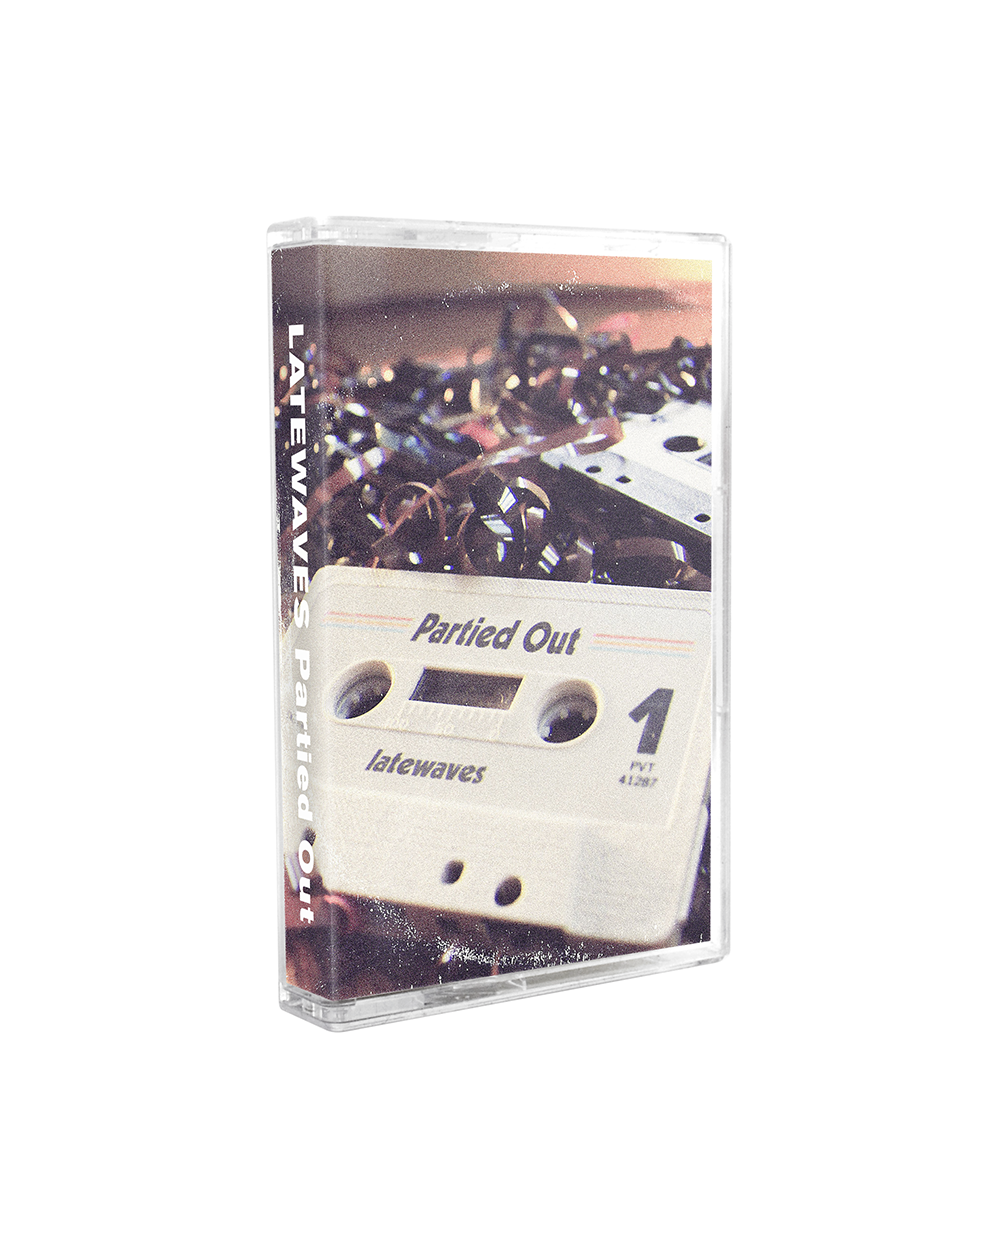 Latewaves : Partied Out (Cassette)